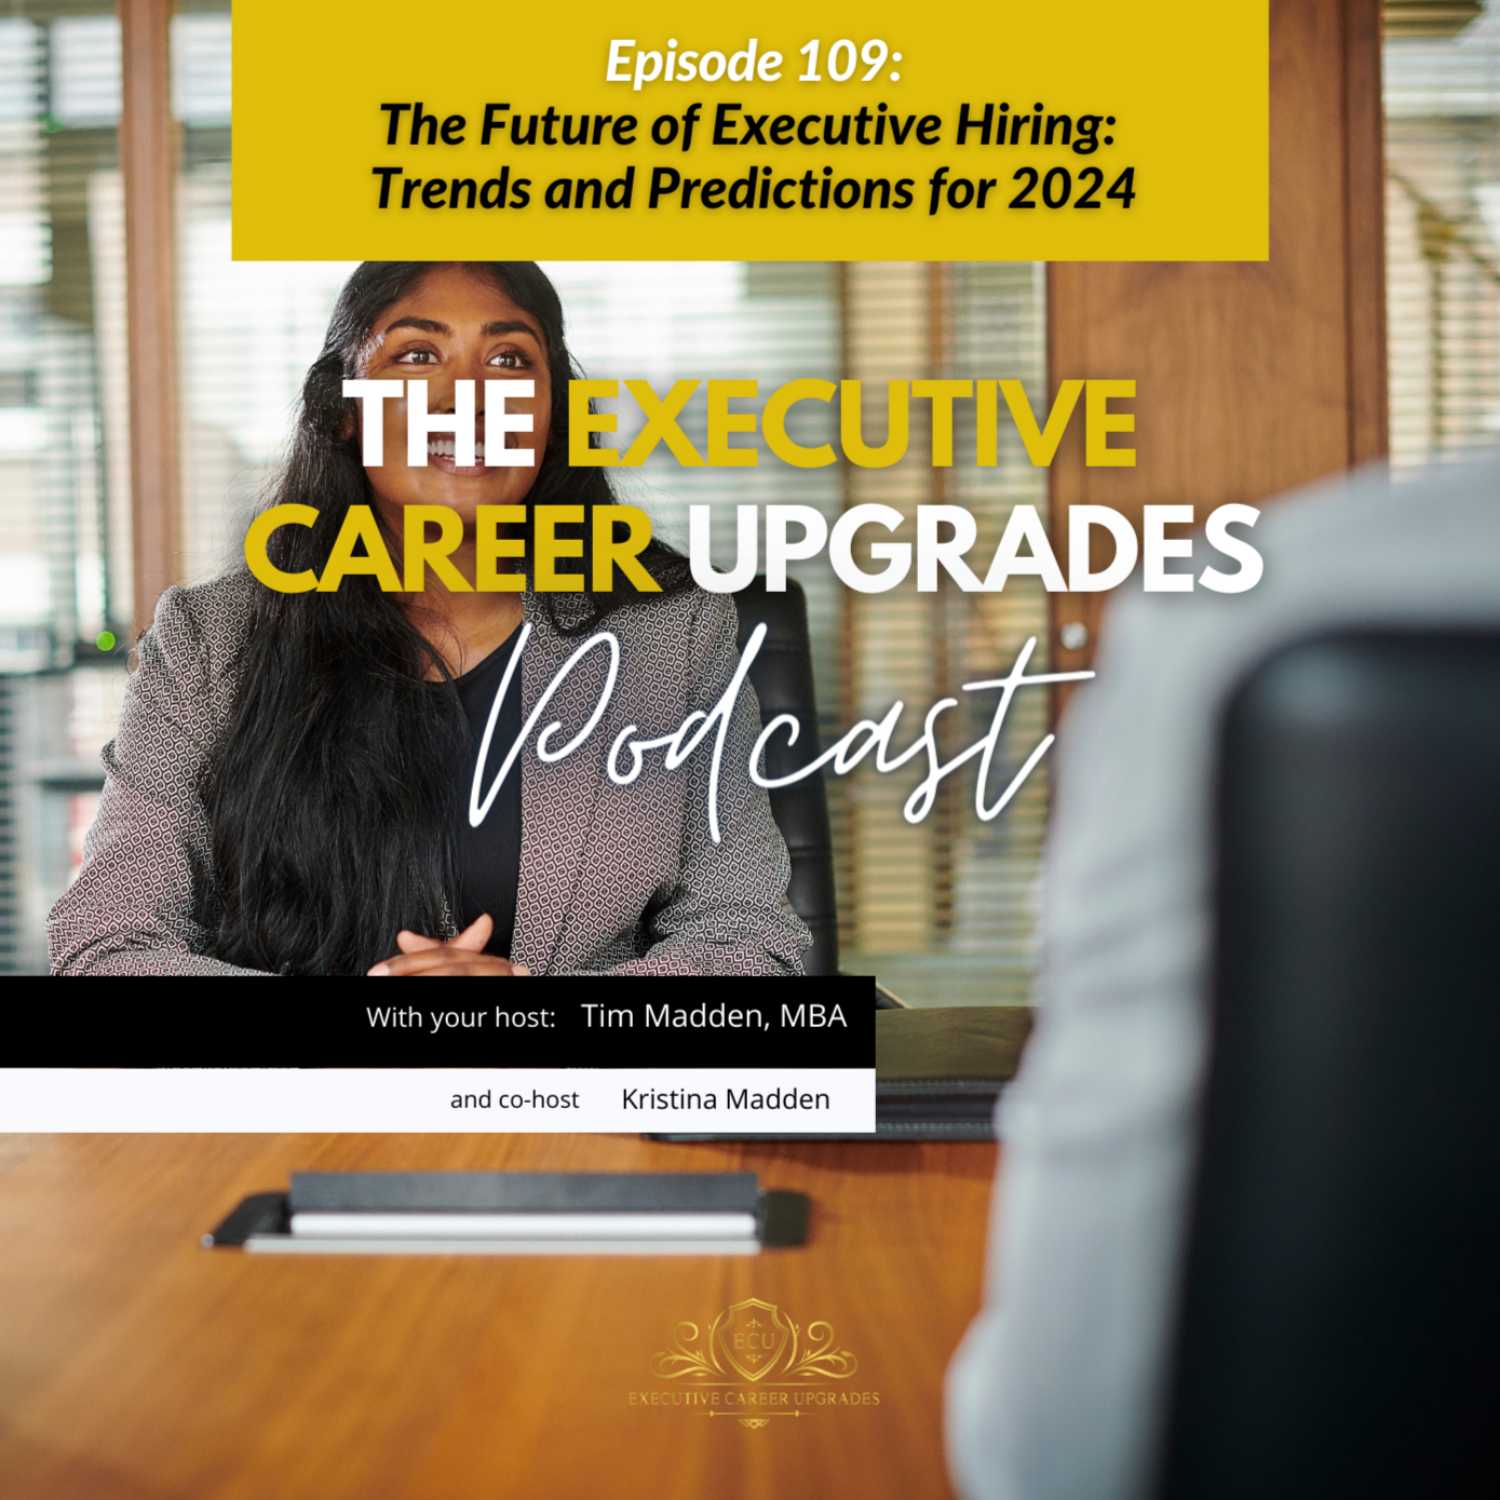 The Future of Executive Hiring: Trends and Predictions for 2024